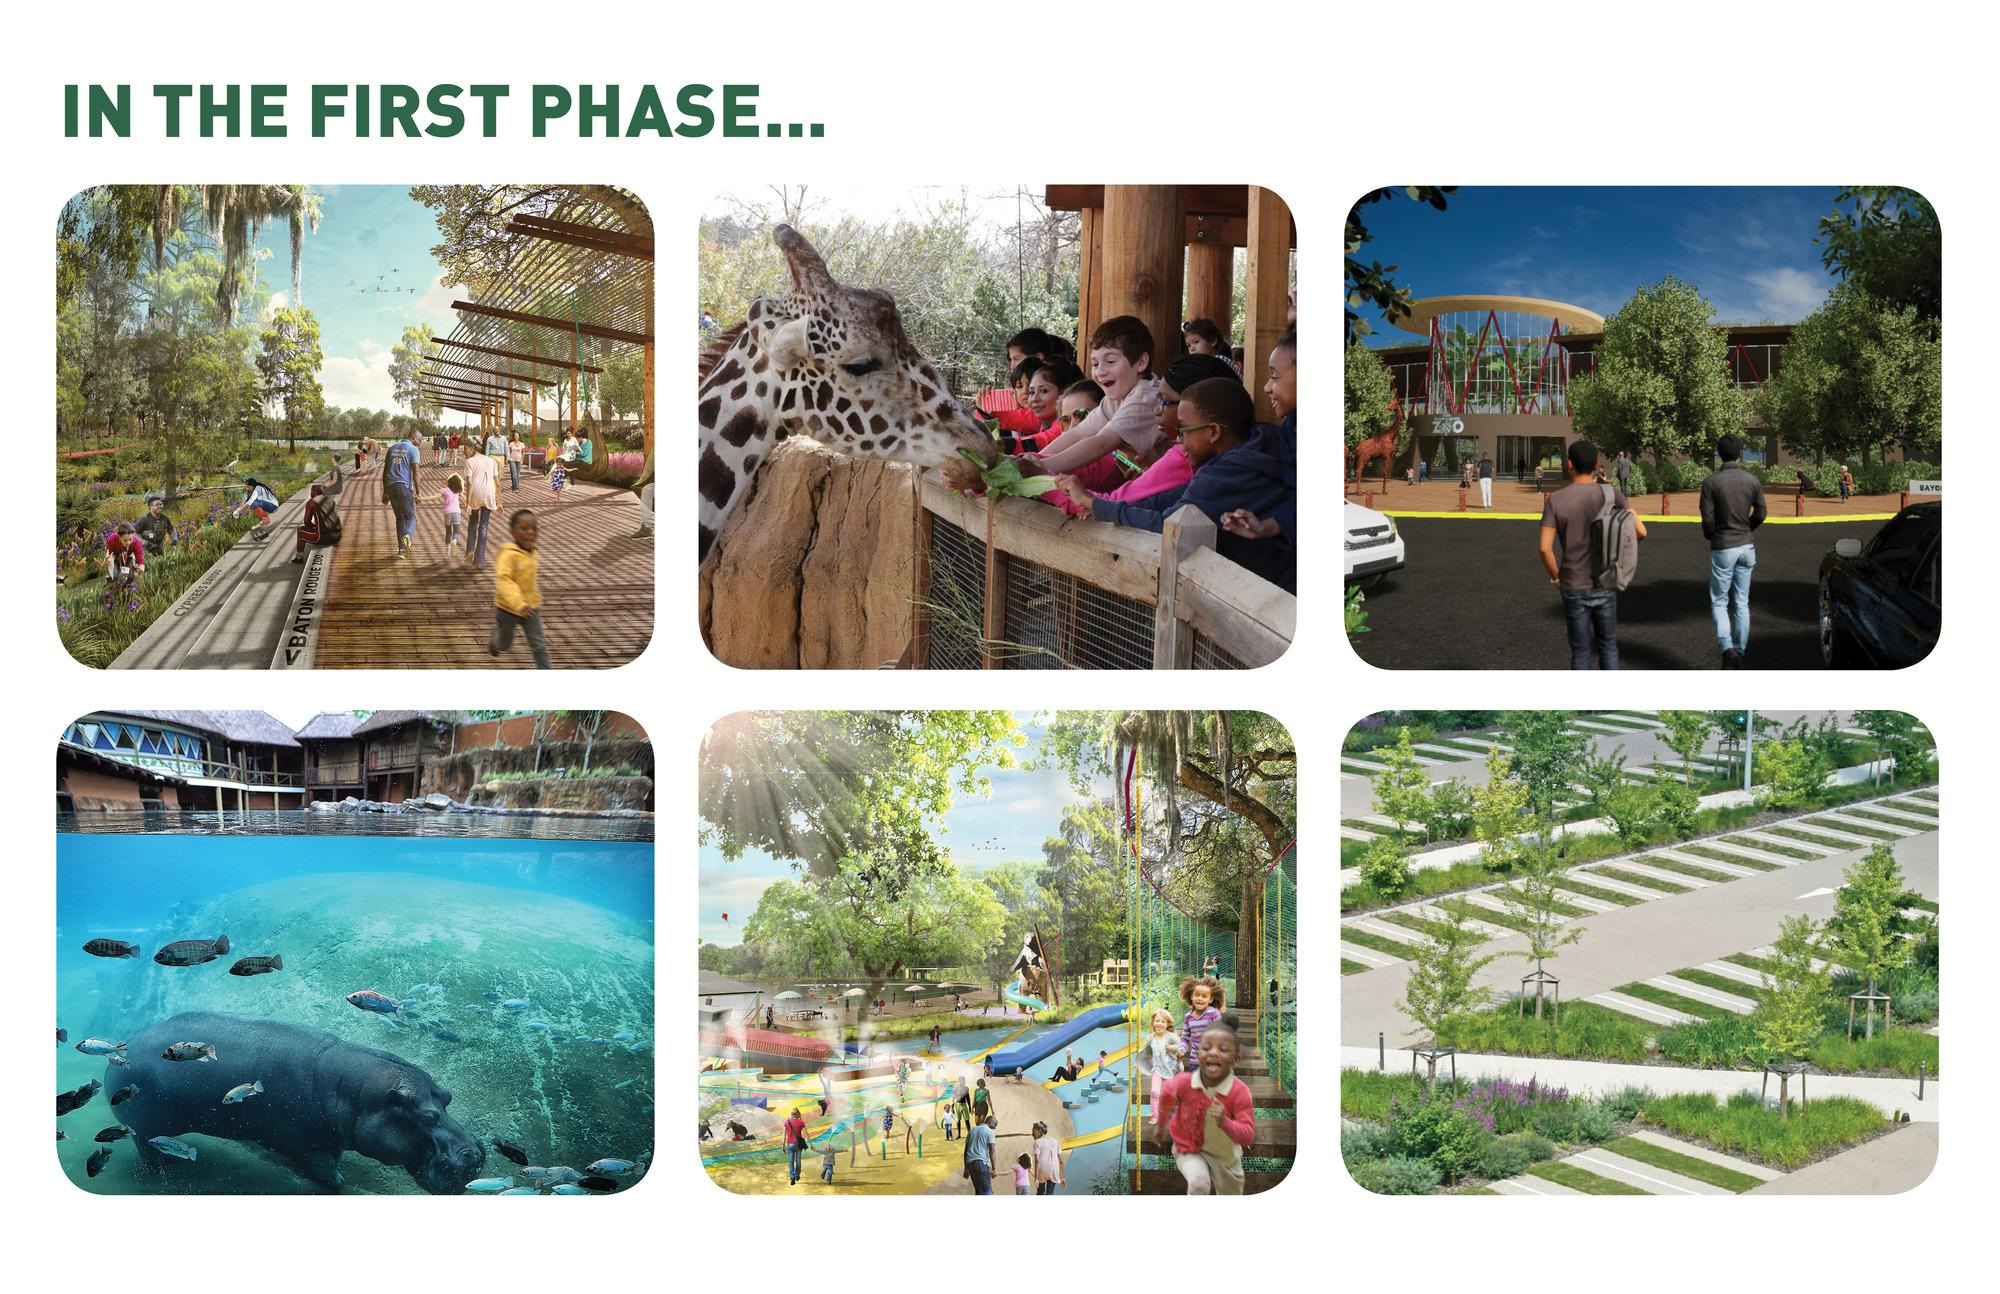 First Phase of zoo plan with spirit images